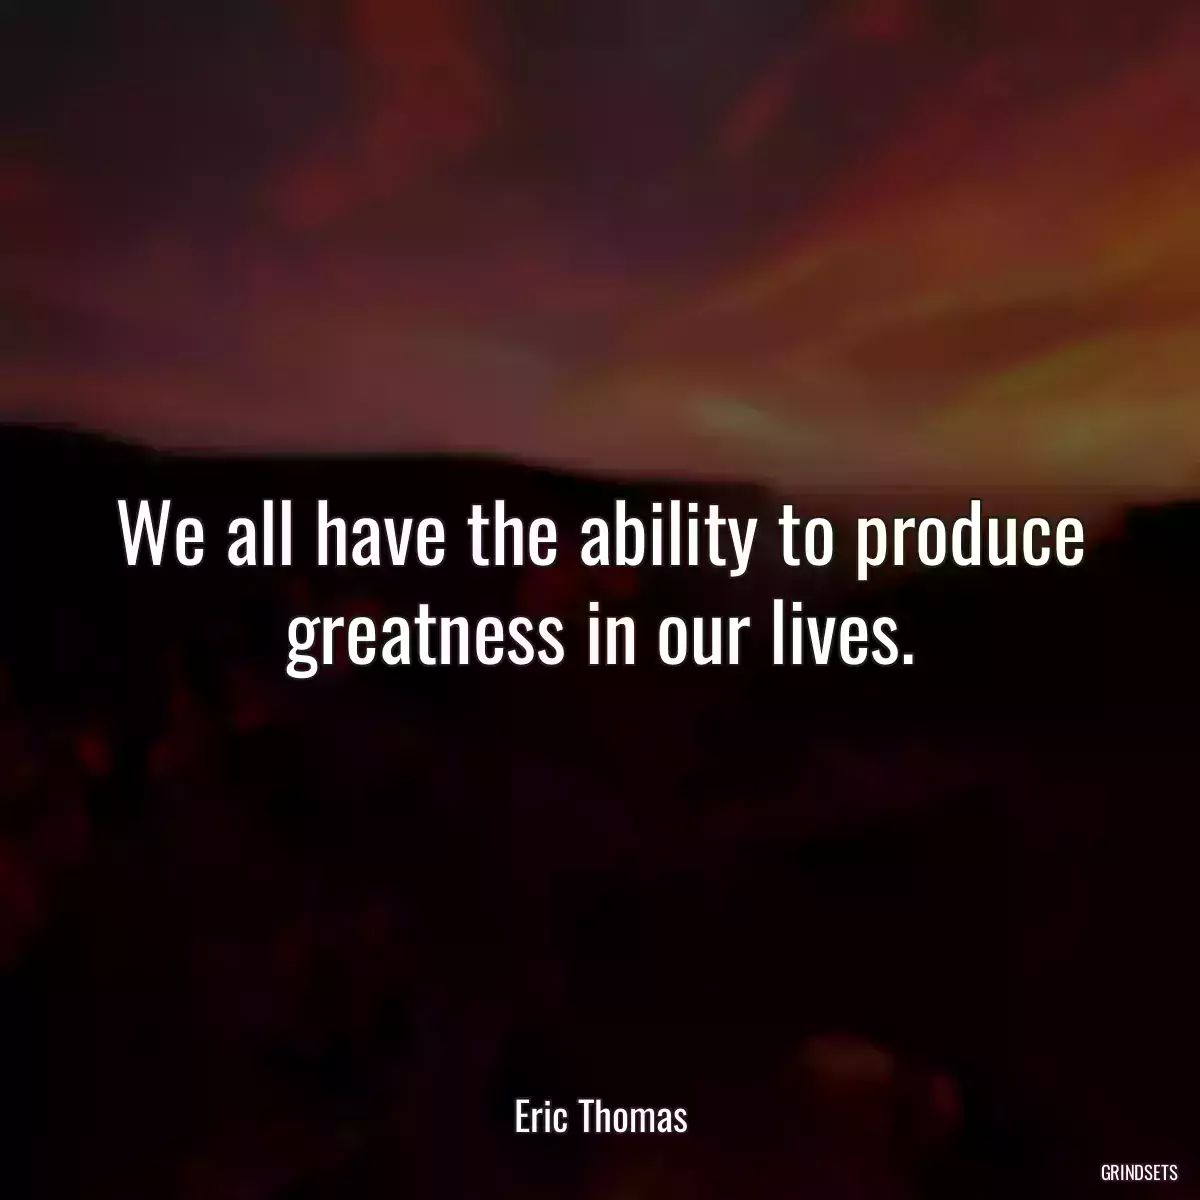 We all have the ability to produce greatness in our lives.